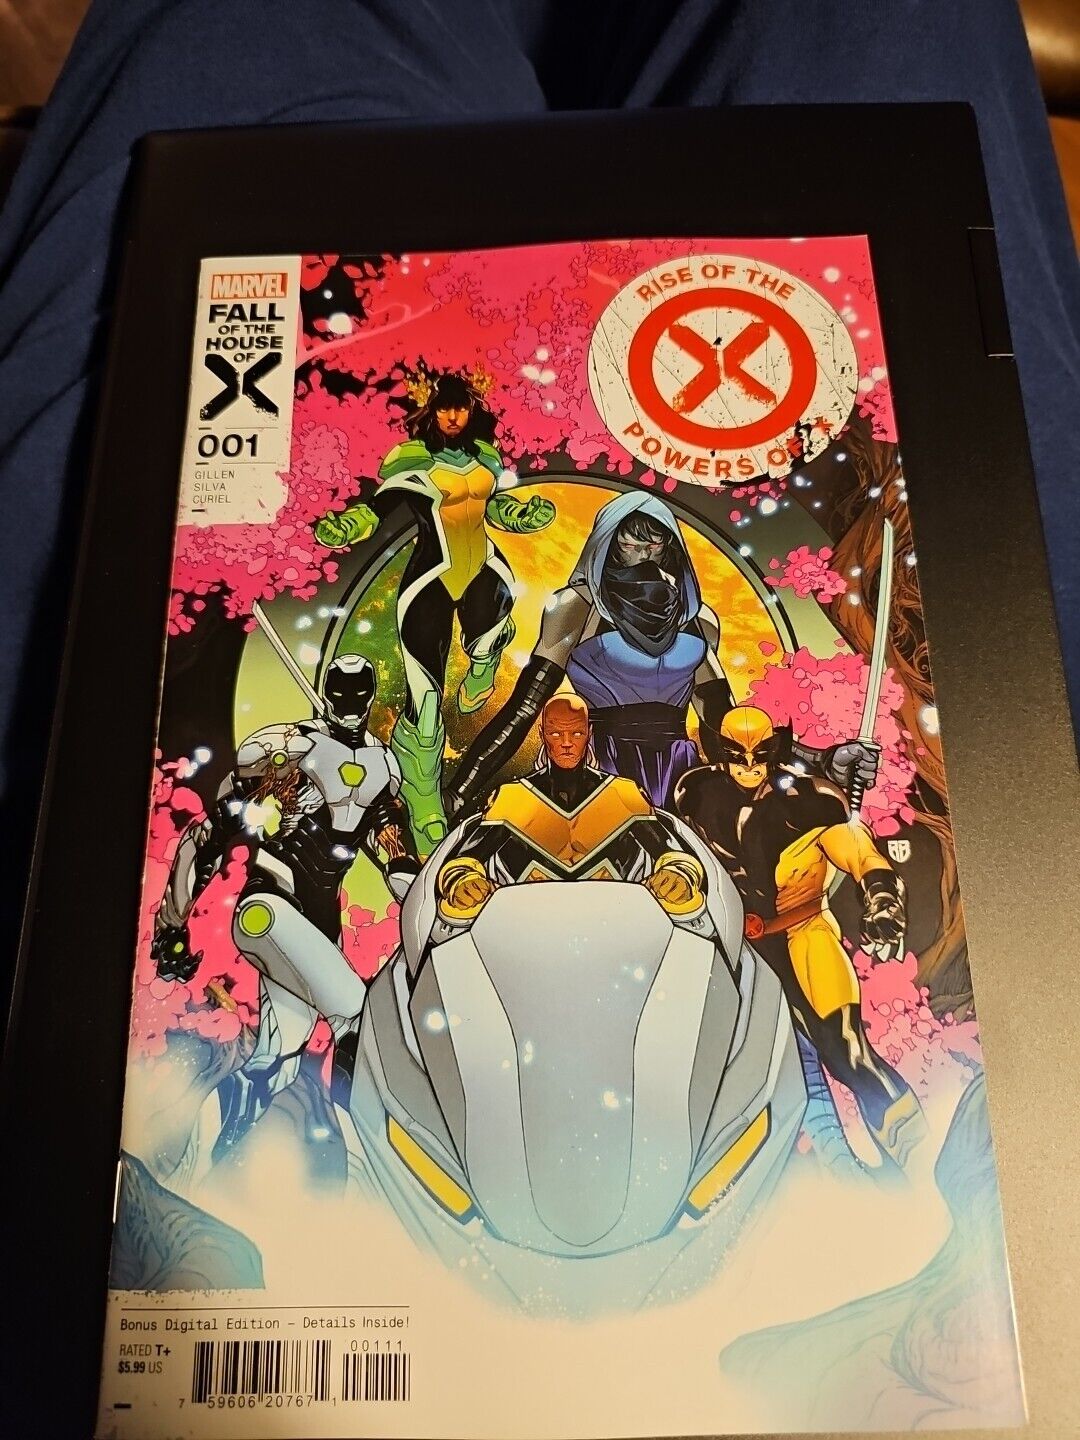 RISE OF THE POWERS OF X #1 NM X-MEN New